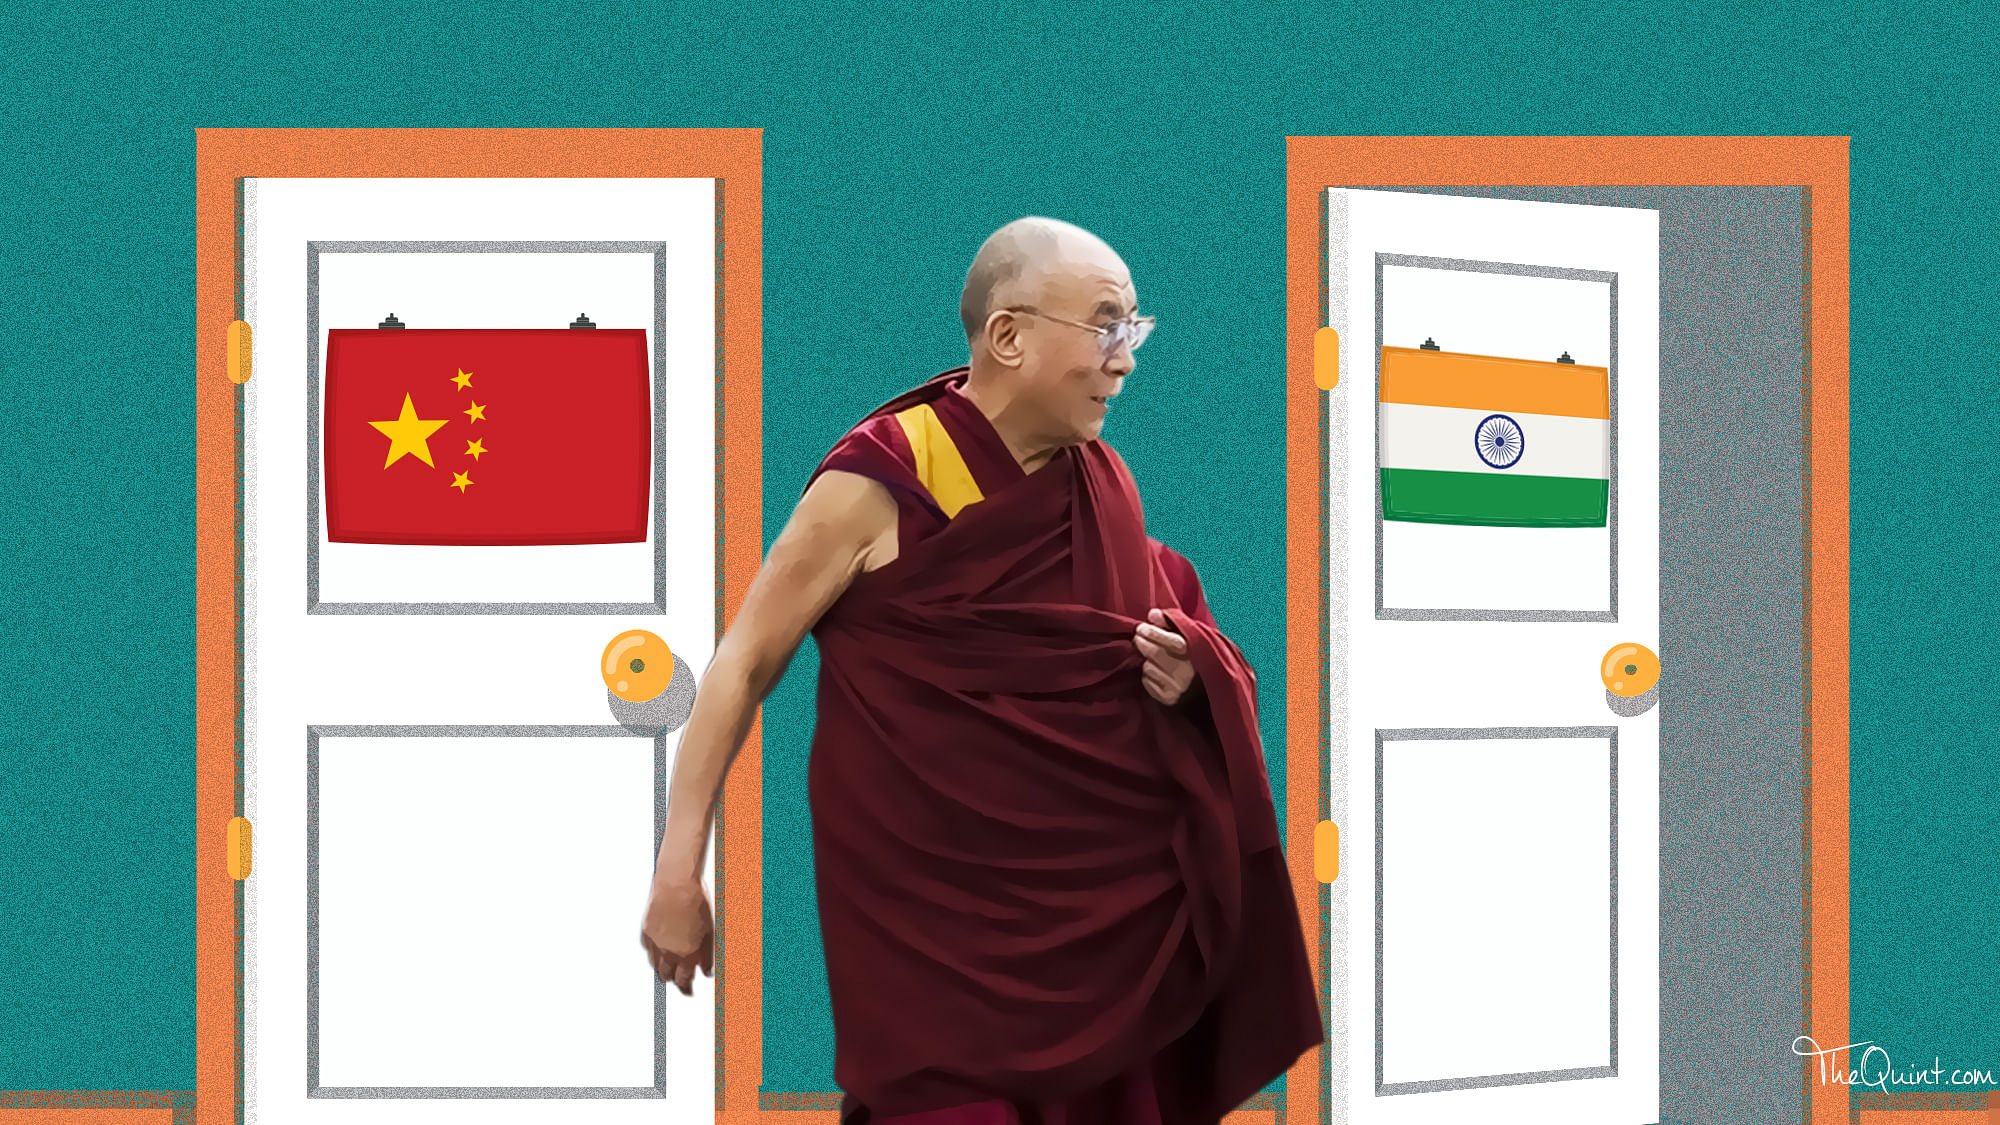 

Even as India and China are locked in a face-off why has the Dalai Lama chosen to keep mum?